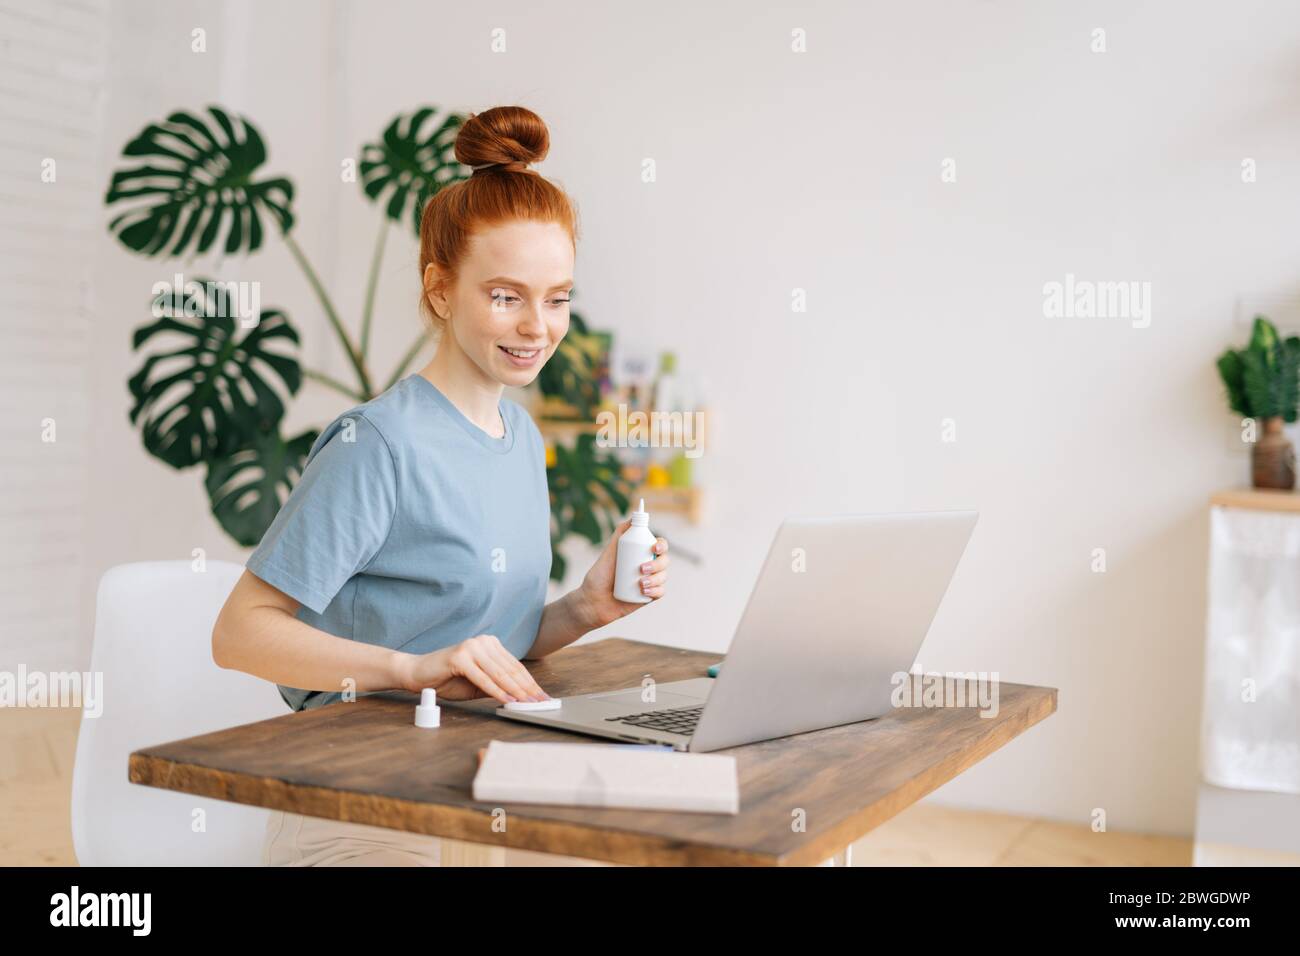 Smiling young redhead woman is wiping laptop computer with sanitizer before starting work  Stock Photo